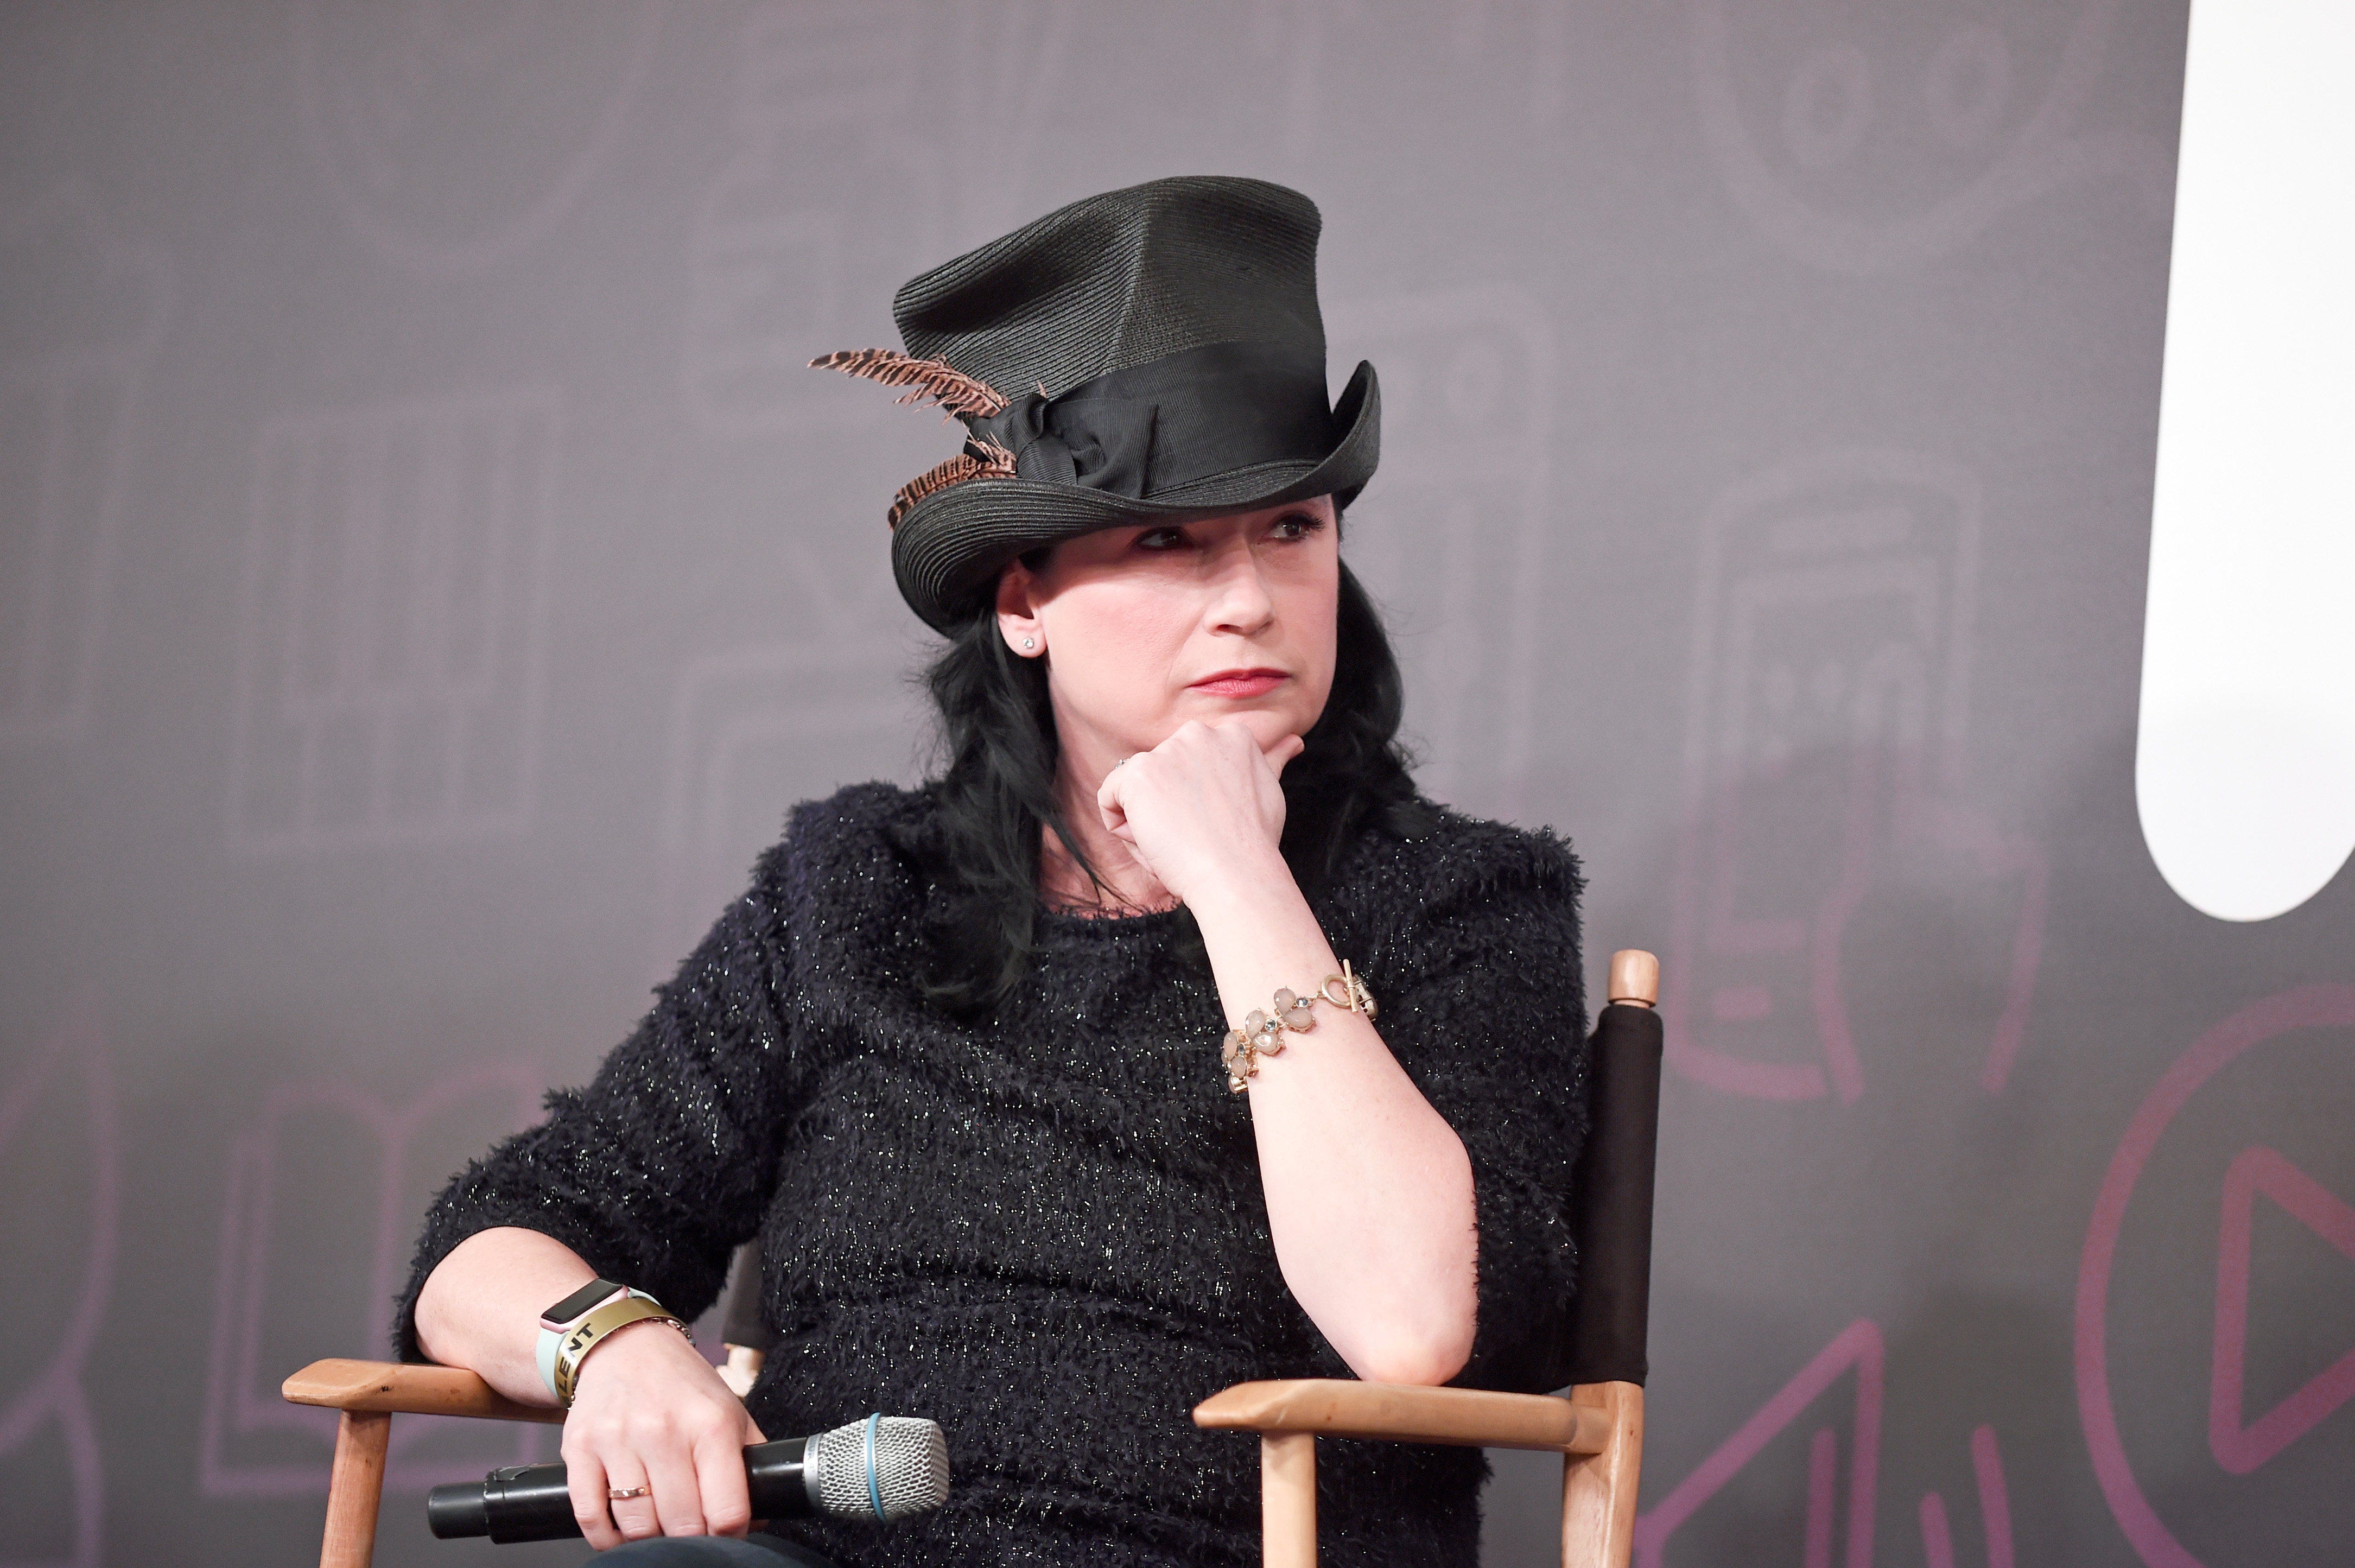 Amy Sherman-Palladino sits at 'Gilmore Girls First Footage Panel' at Entertainment Weekly's Popfest in 2016, dressed in black and wearing a black hat.